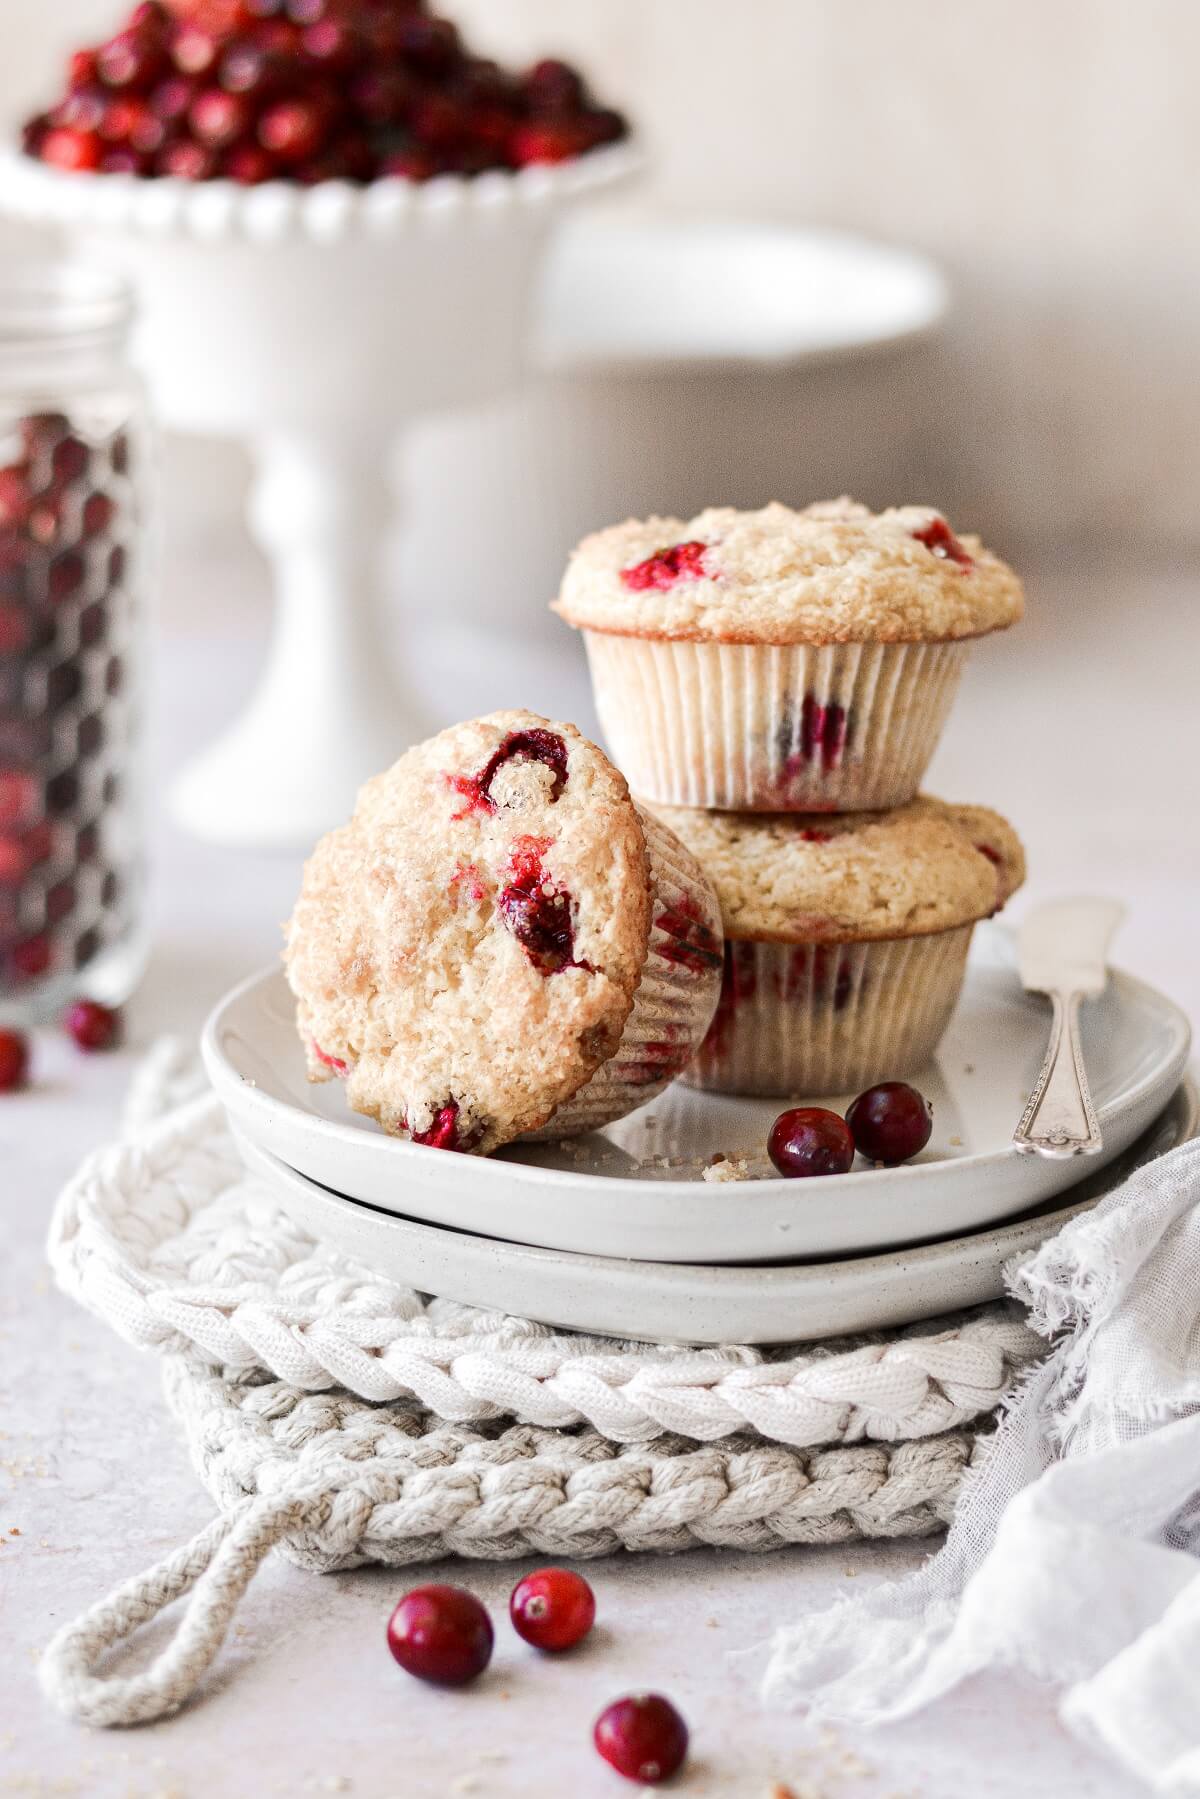 Cranberry orange muffins on a stack of plates.